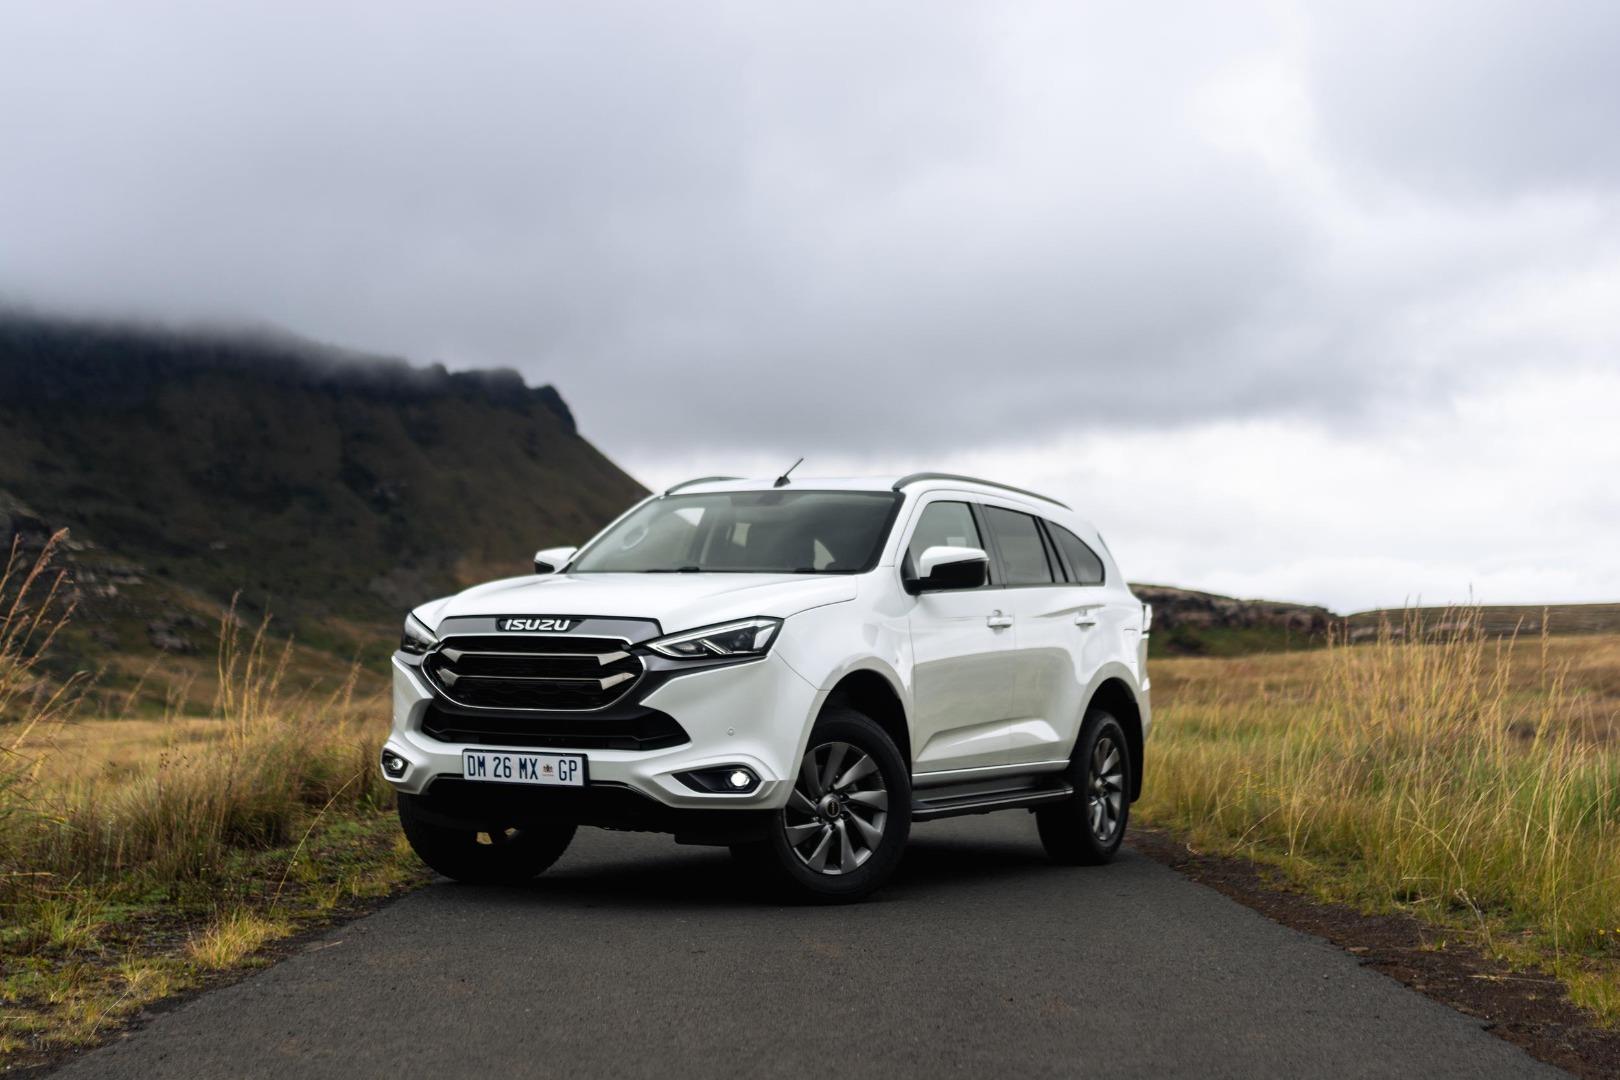 ford everest vs isuzu mu-x vs toyota fortuner: which one has the lowest running costs?